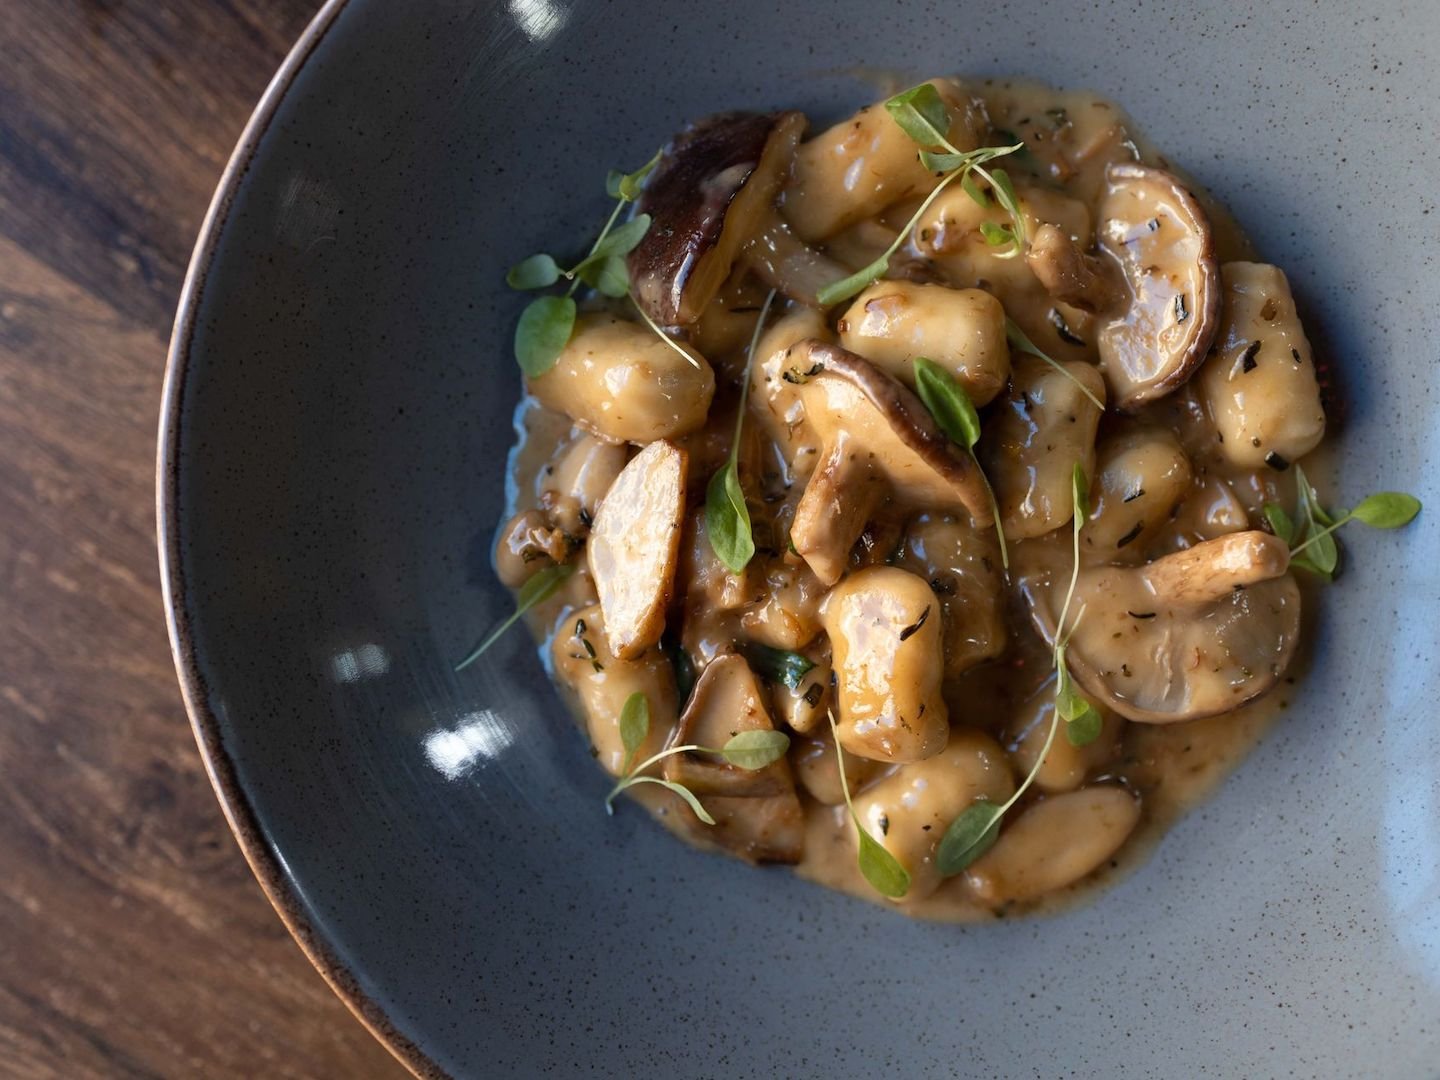 Freshly made gnocchi and wild mushrooms in a creamy truffle sauce.